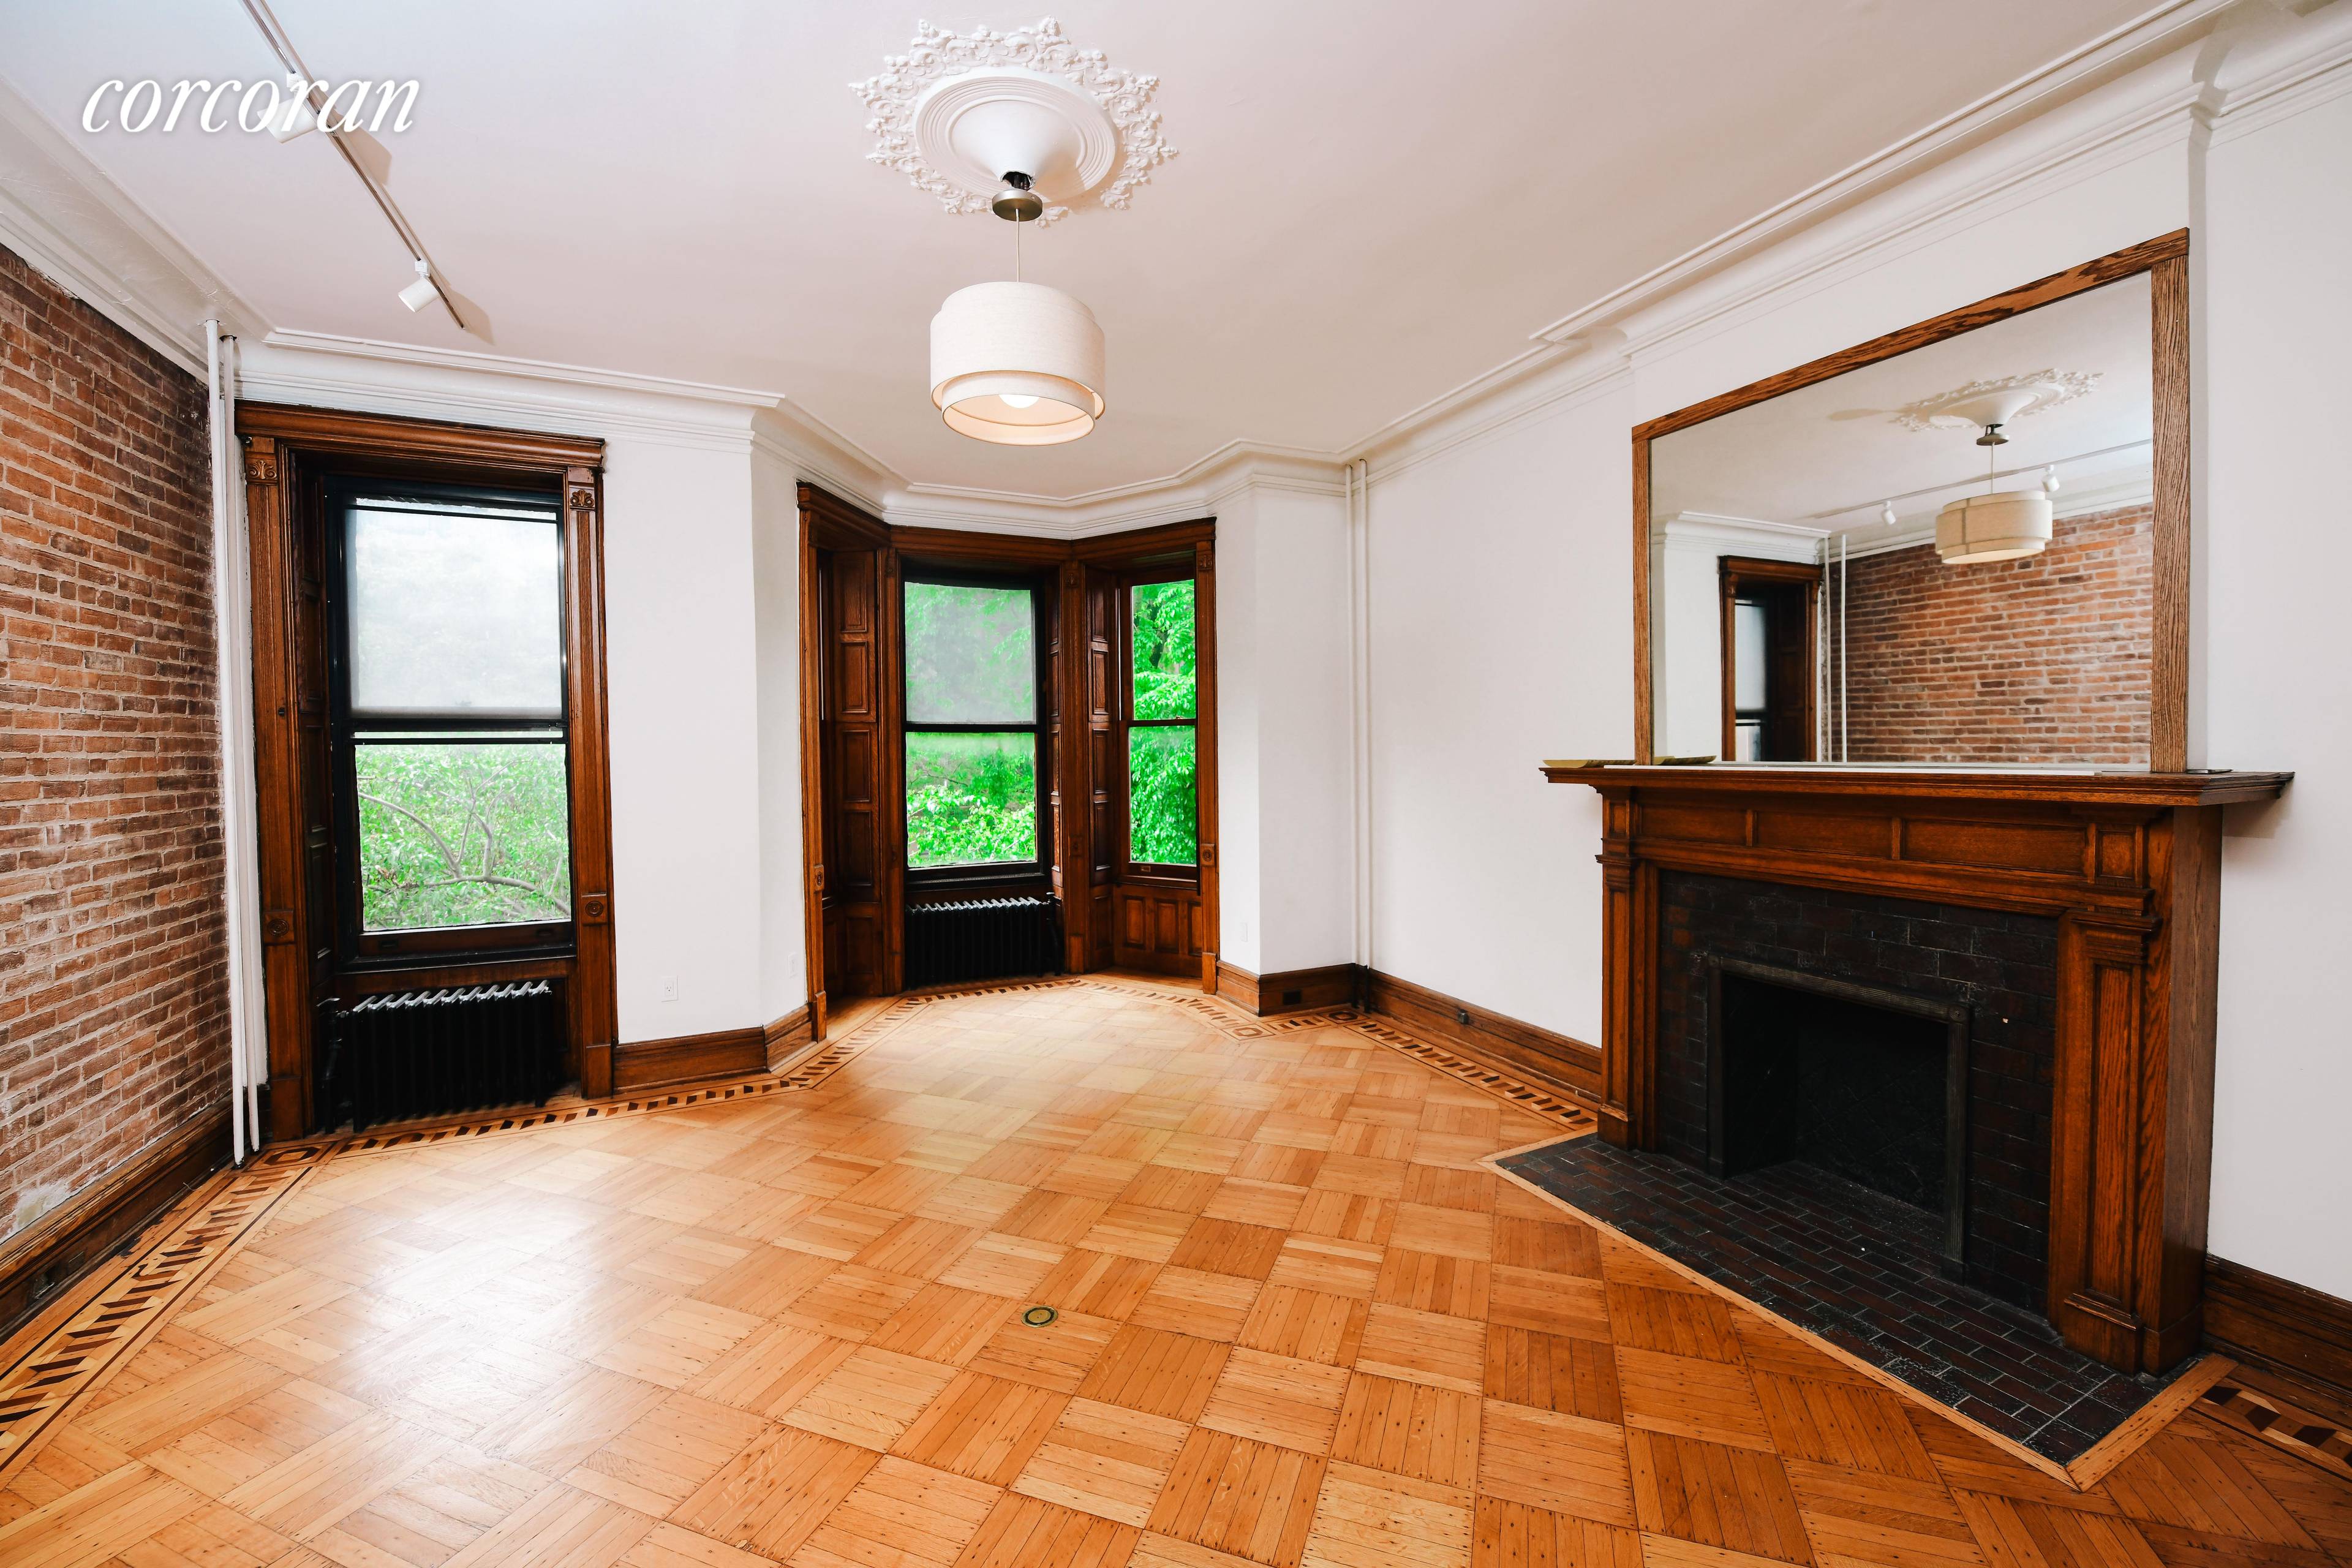 This rarely available gorgeous Brownstone with perfect proportions feels even more spacious than the generous 3400 square feet it measures.